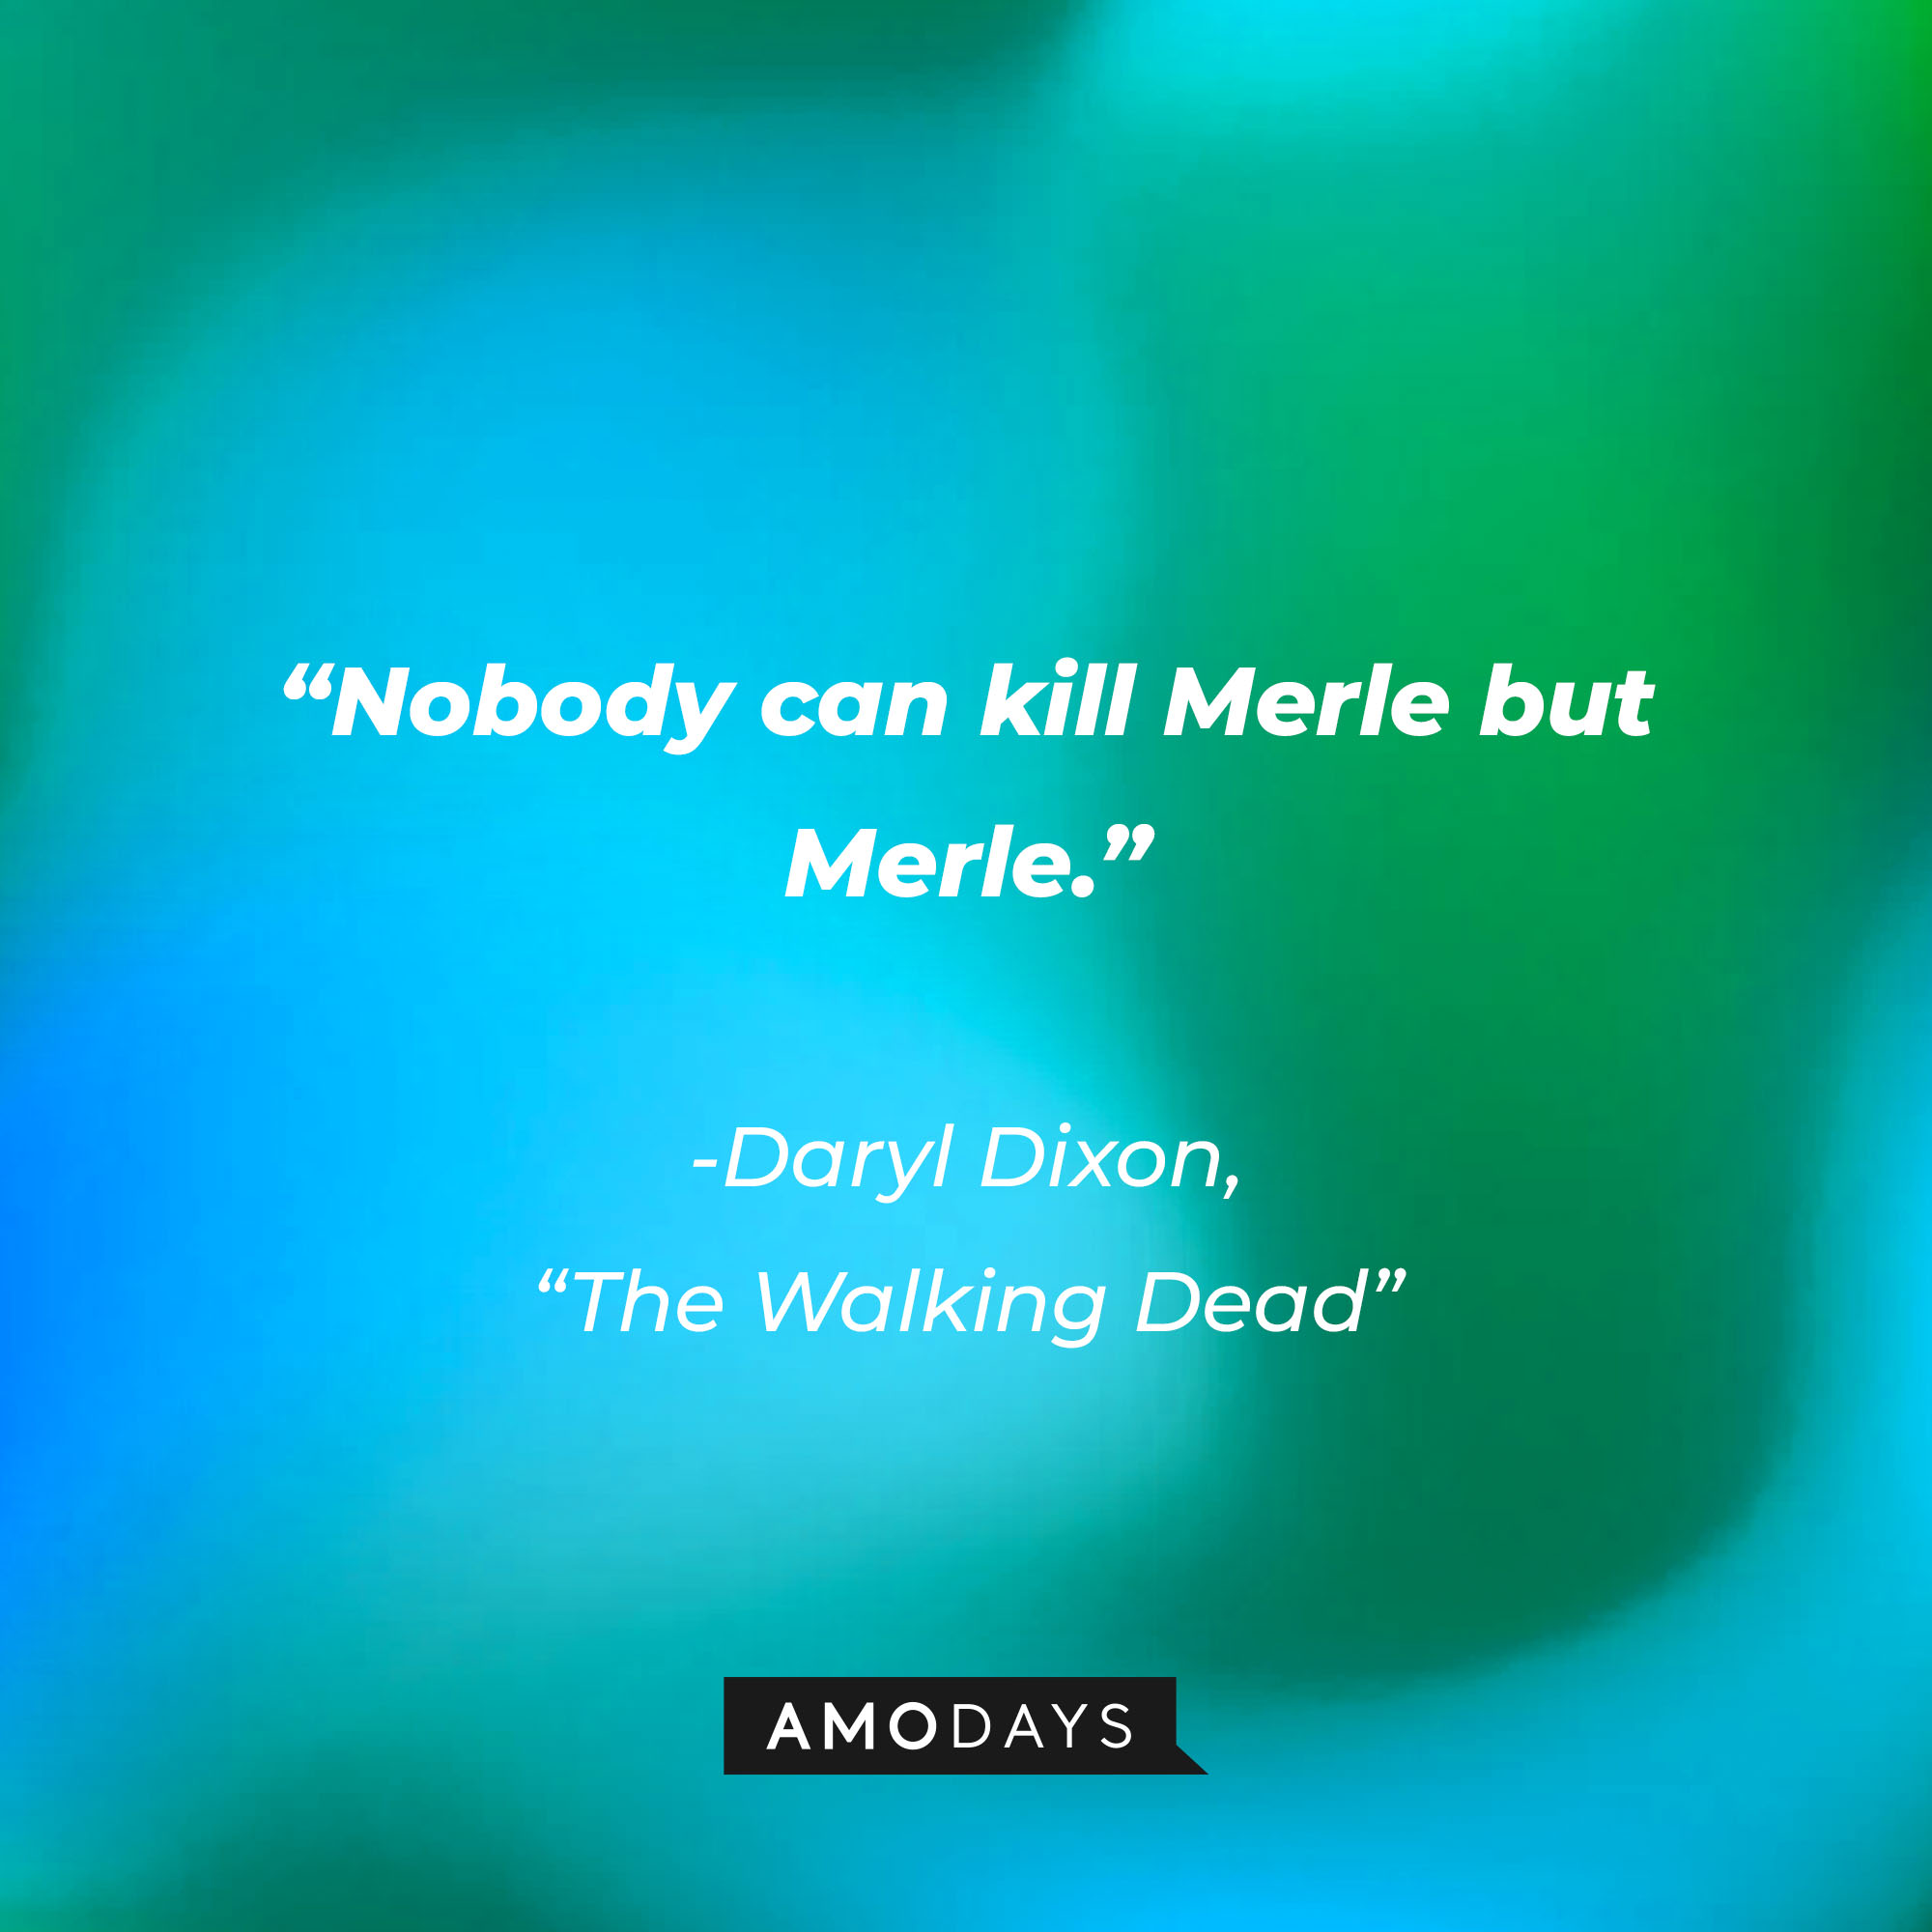 Daryl Dixon’s quote from “The Walking Dead”: “Nobody can kill Merle but Merle.” | Source: AmoDays